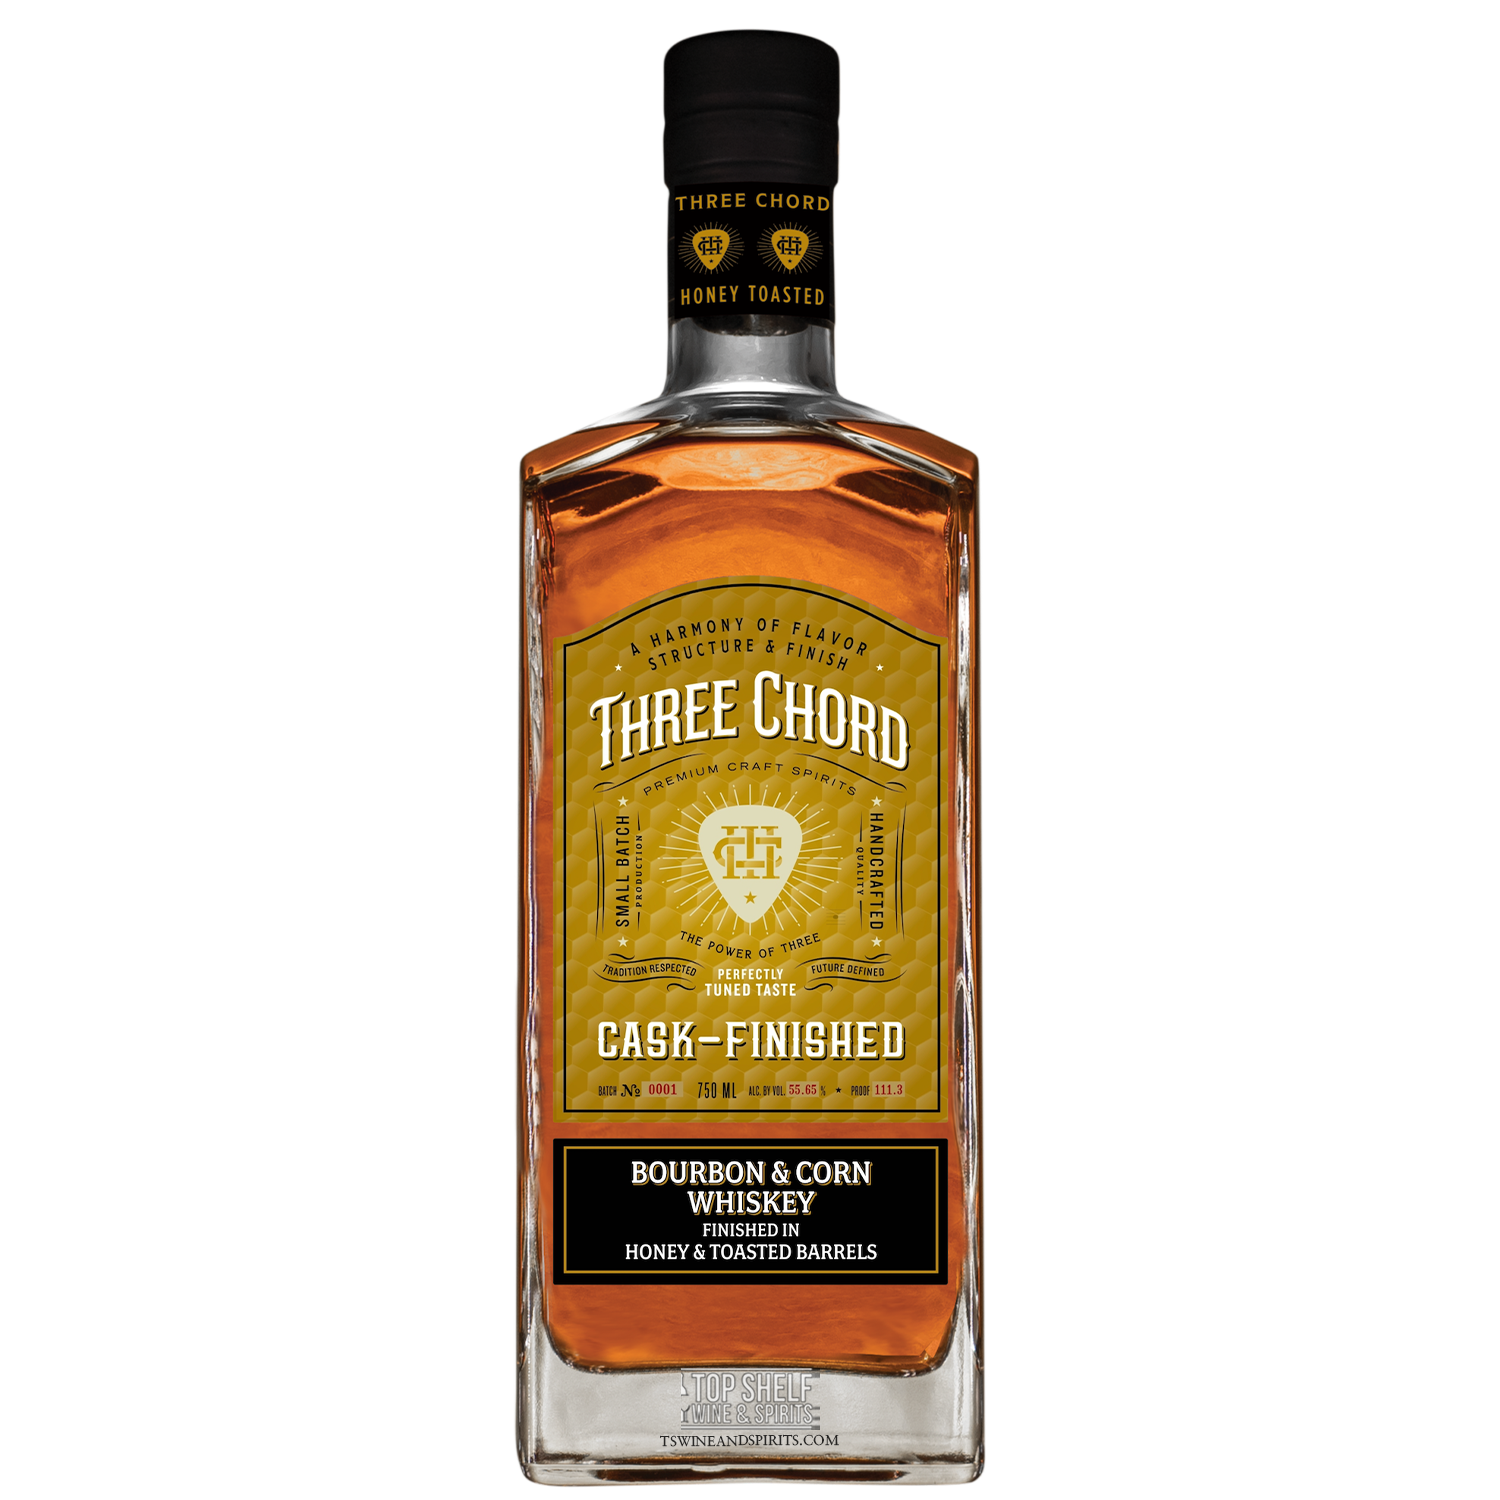 Three Chord Honey Toast & Toasted Barrels Whiskey (Limited Release)